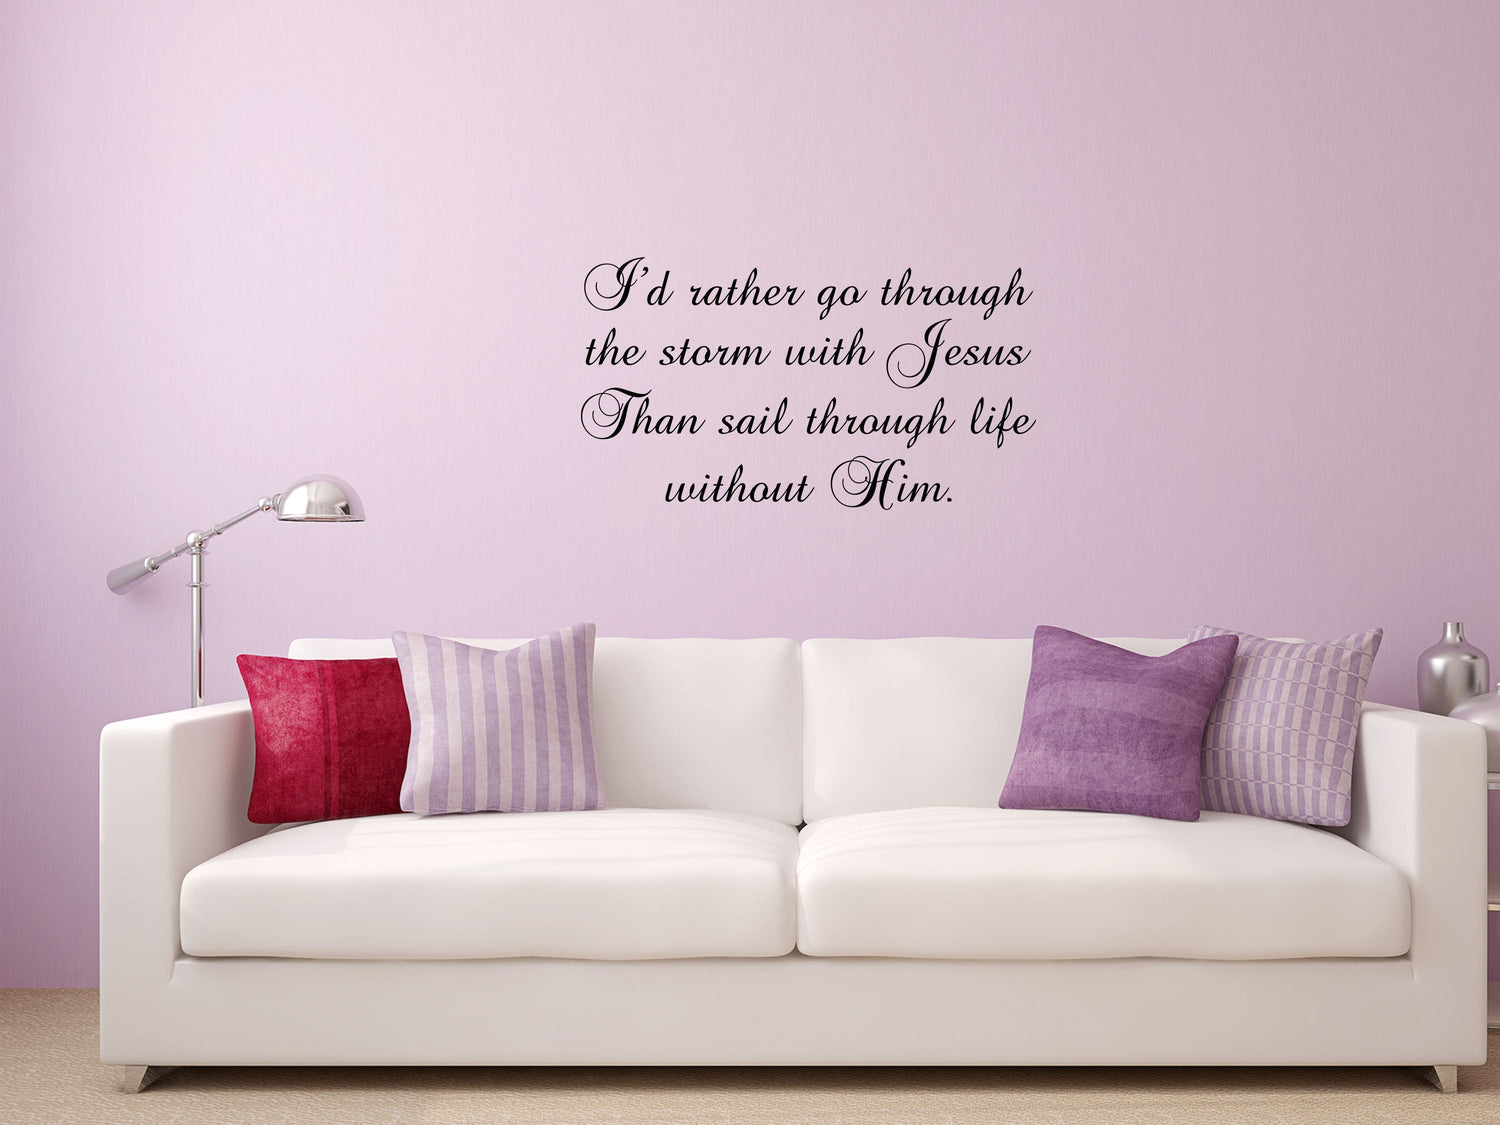 I'd Rather Go Through The Storm With Jesus Wall Stickers - Wall Decor Stickers - Christian Inspirational Bible Decal Vinyl Wall Decal Done 